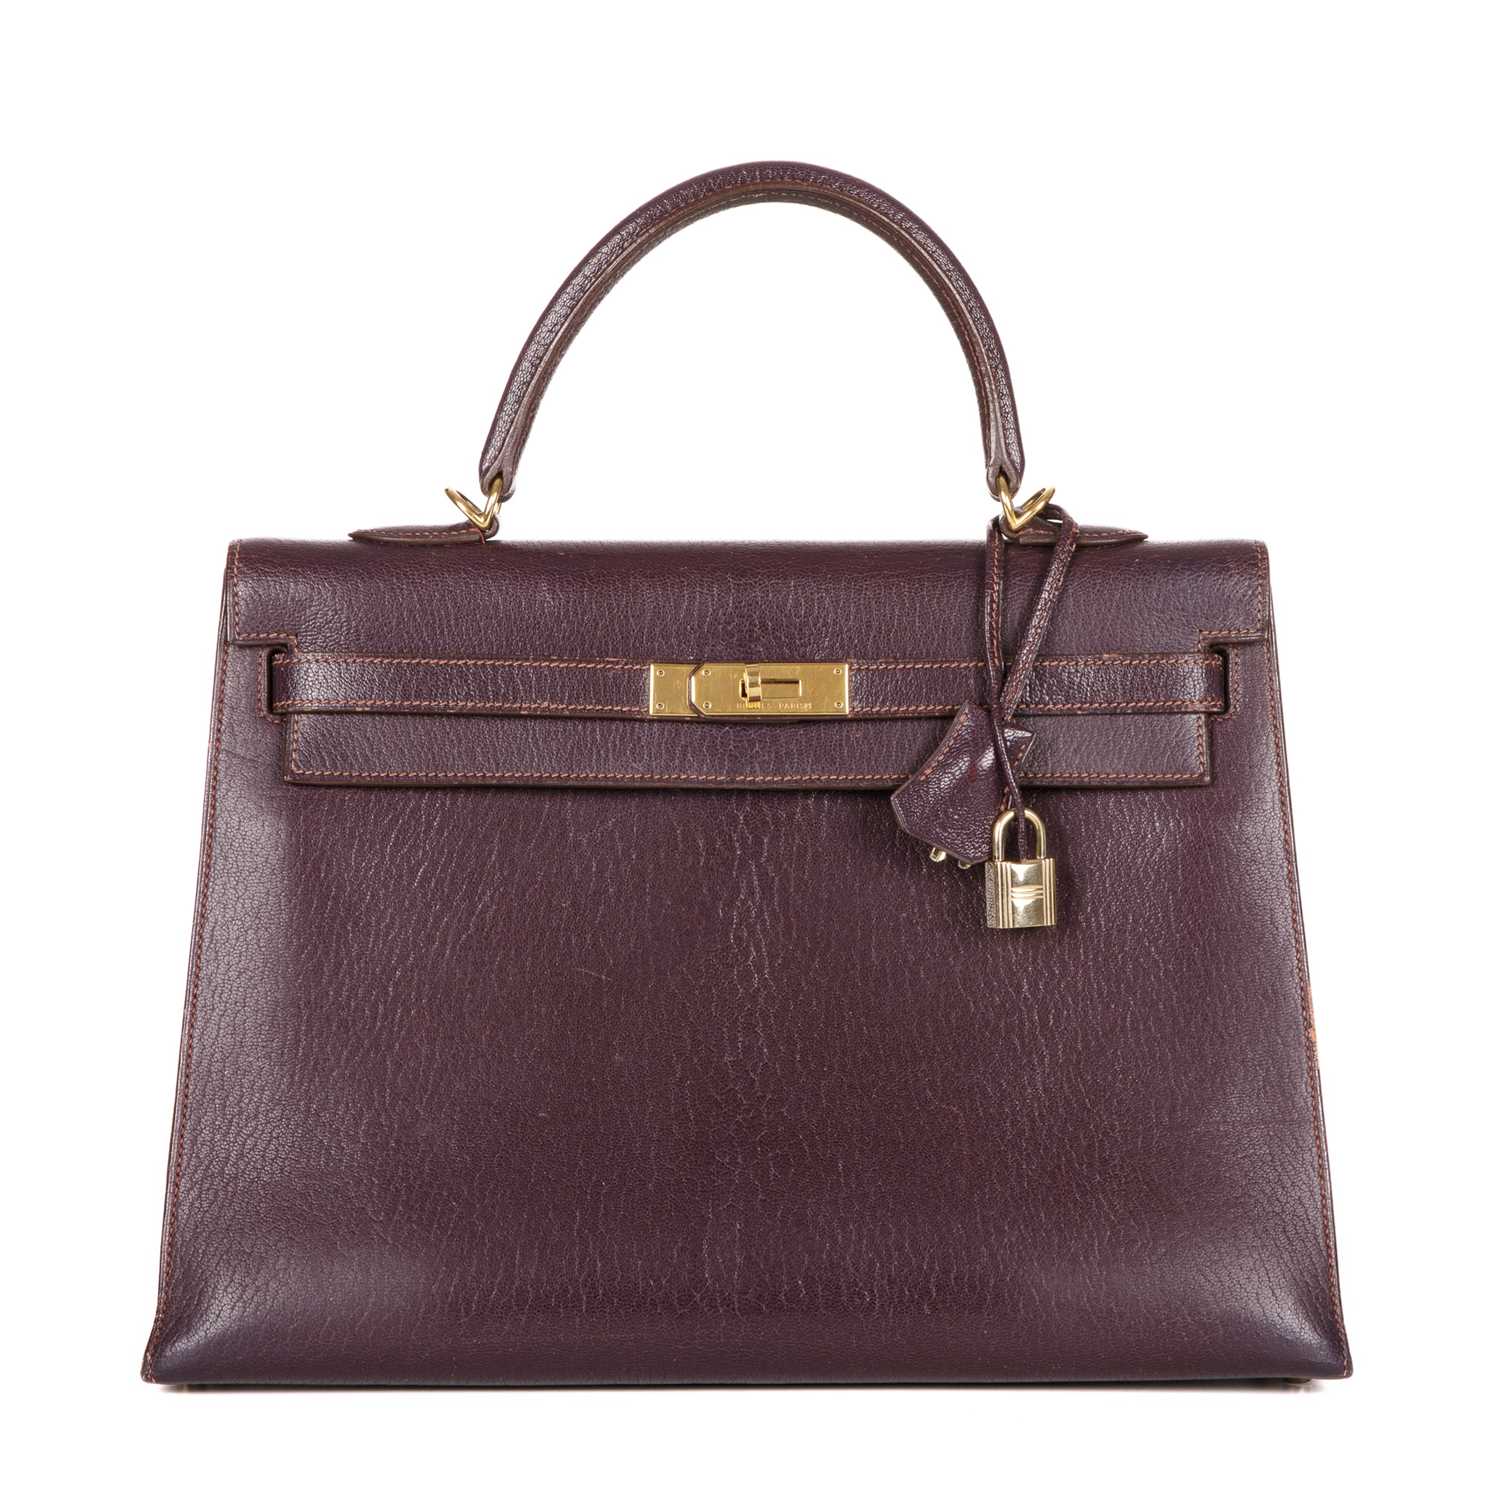 Hermes, a 2001 Kelly Sellier 35 handbag, crafted from Chevre Coromandel plum leather, with gold - Bild 2 aus 5